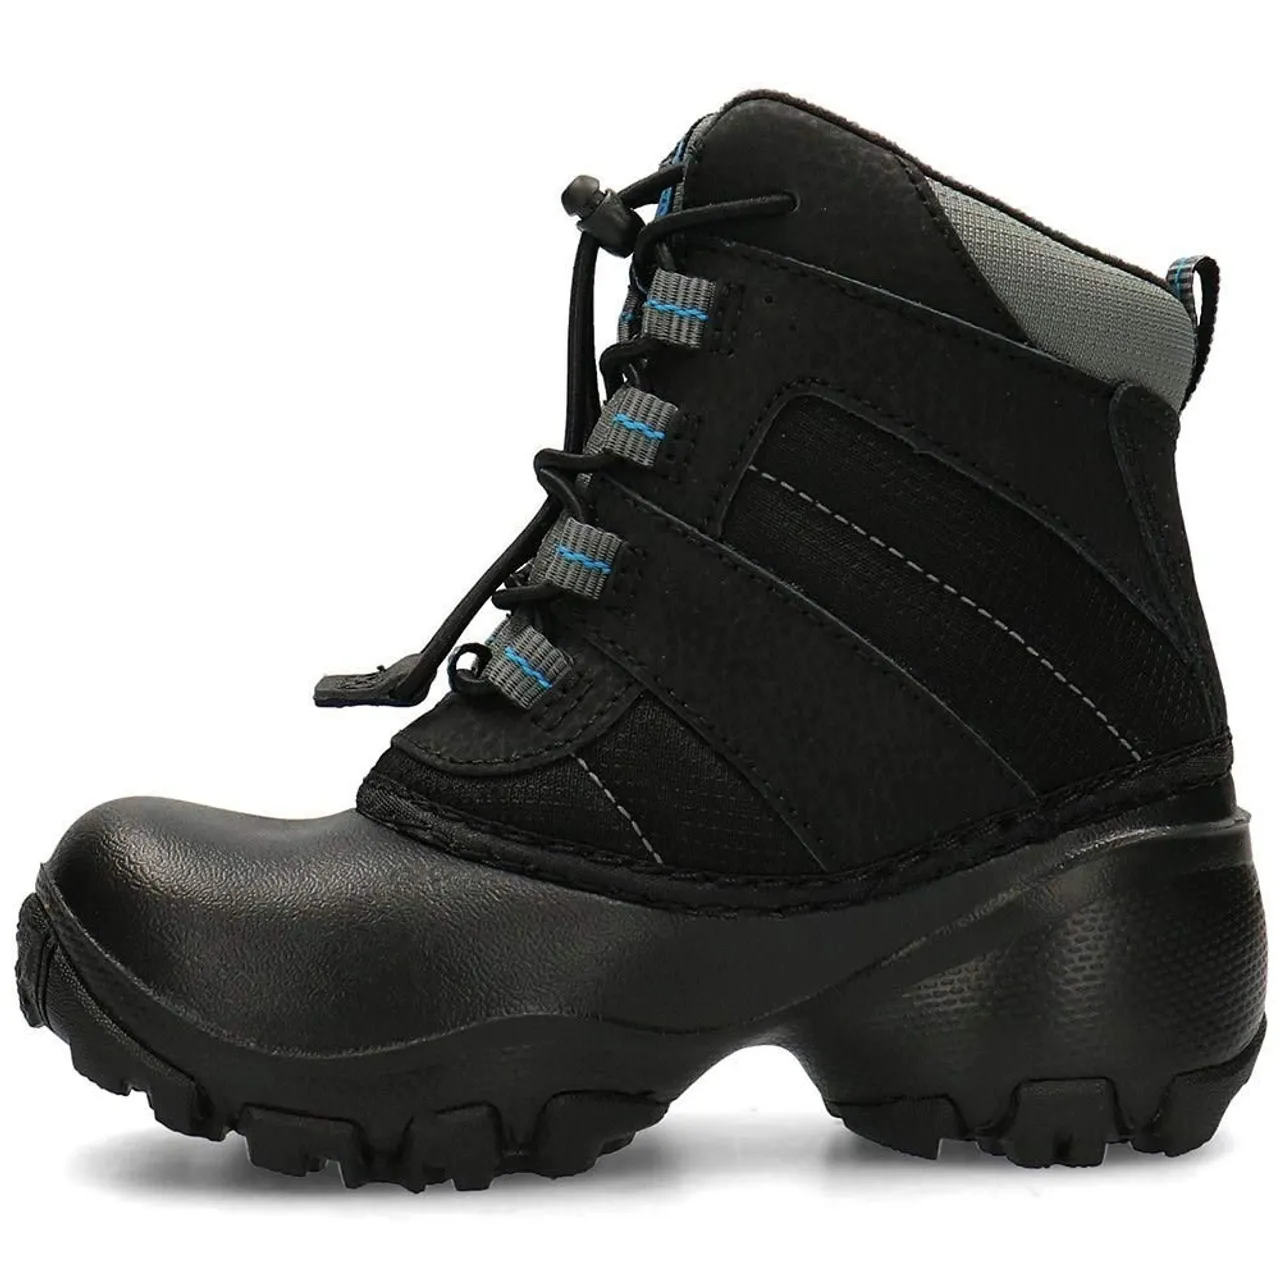 Columbia Boy's Rope Tow Snow Boot Waterproof Hiking Shoes